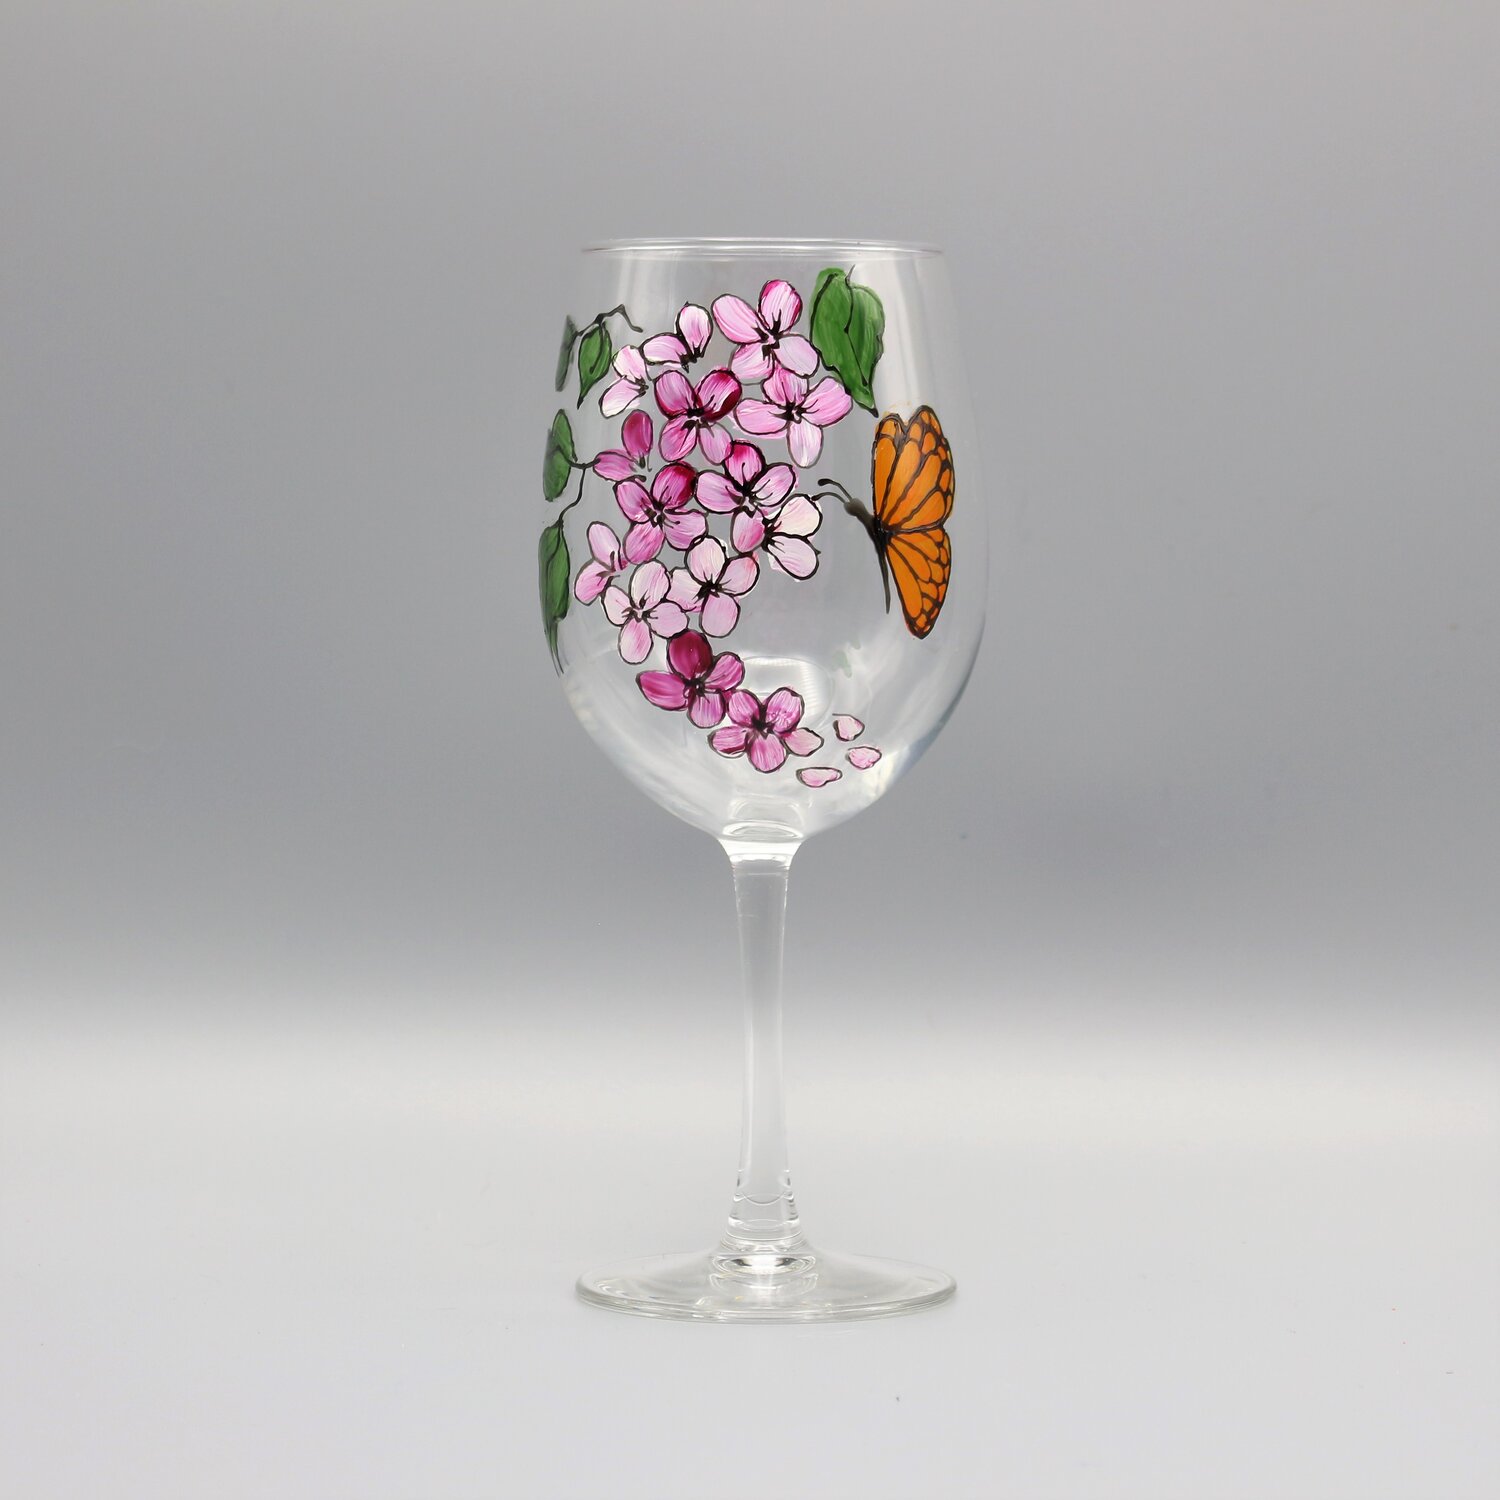 https://images.squarespace-cdn.com/content/v1/5570dc78e4b0bbe8e5cab3d0/1580176073955-R2DB0214LAW0GK3JMGR9/butterfly_and_flower_wine_glass_pink.JPG?format=1500w